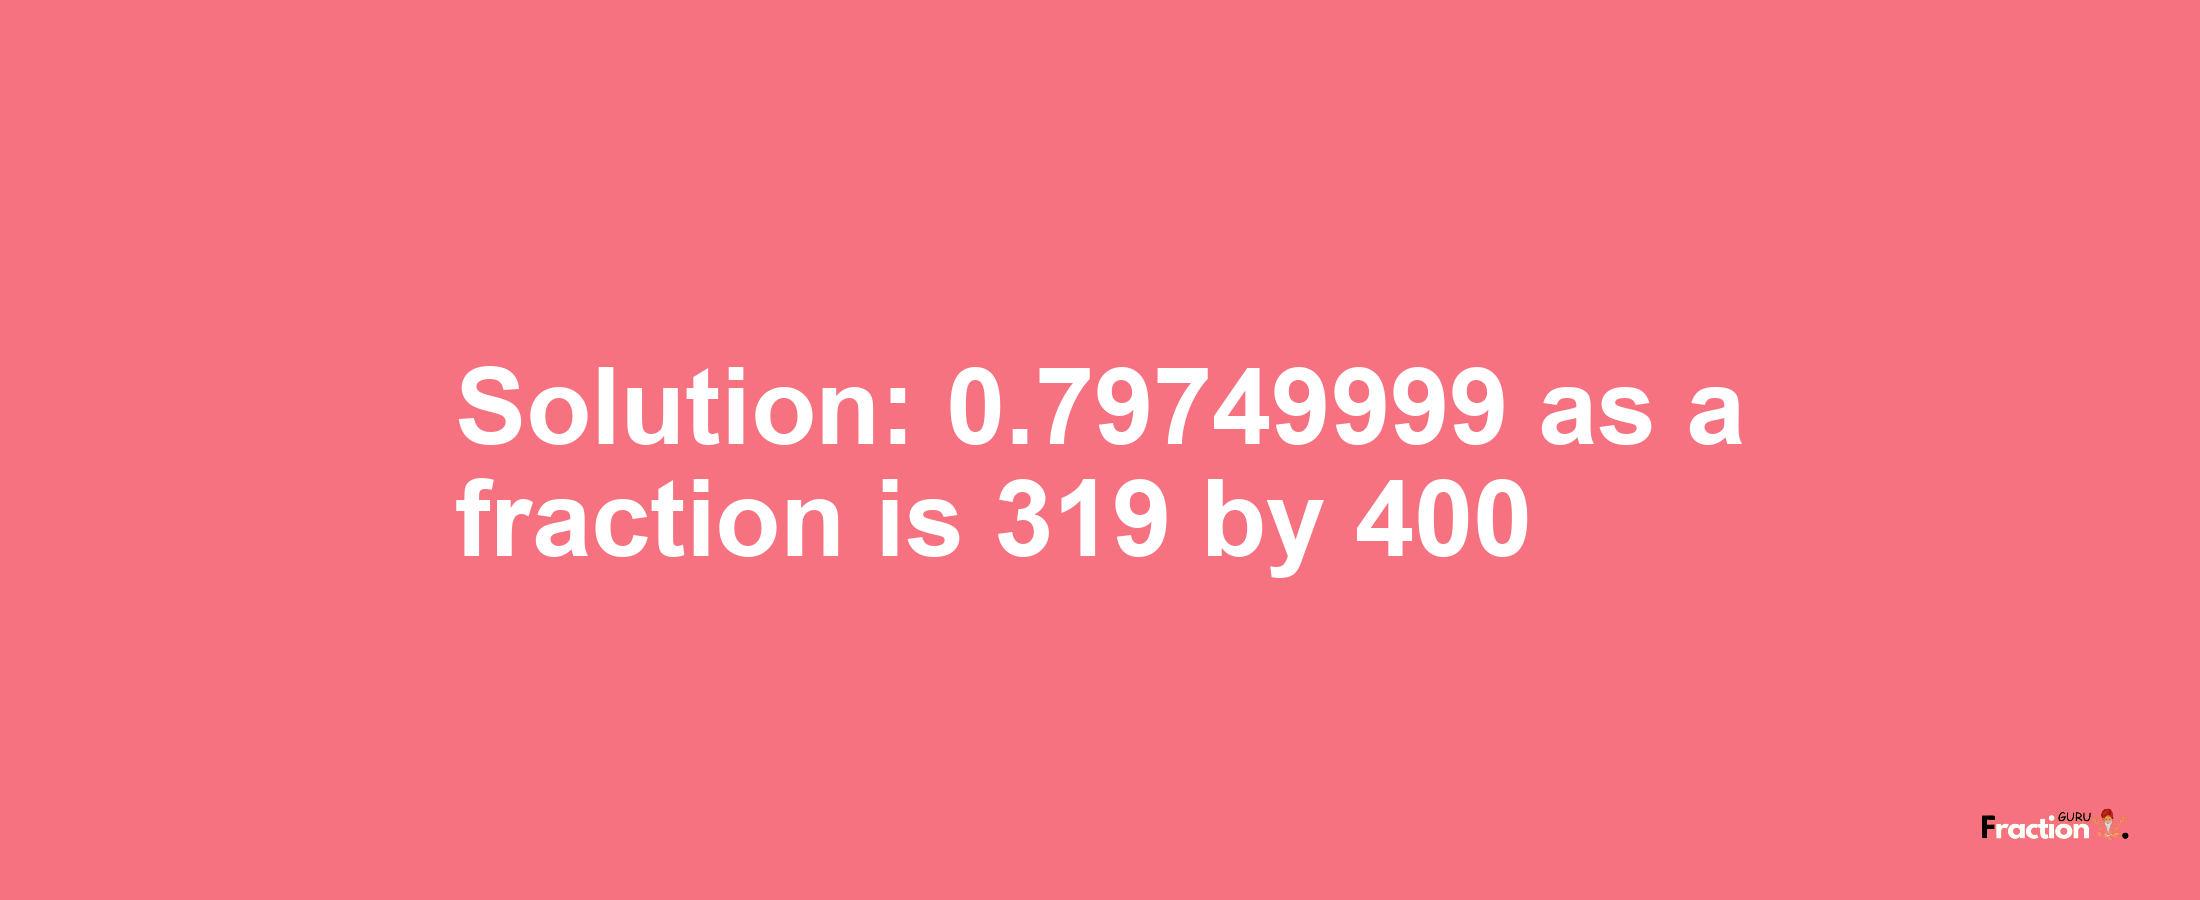 Solution:0.79749999 as a fraction is 319/400